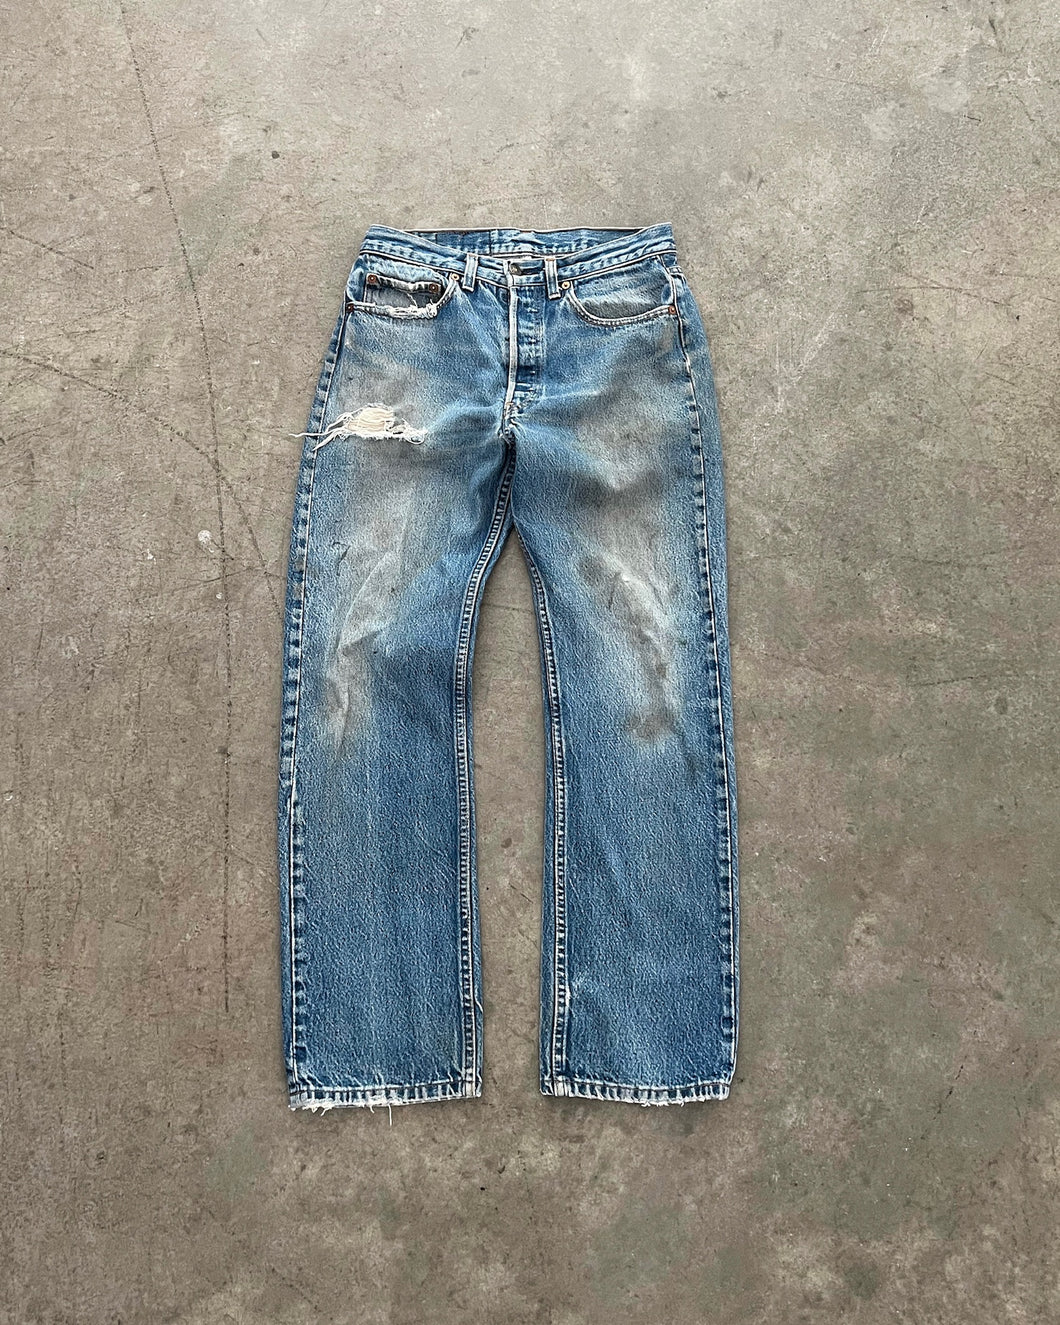 LEVI’S 501 DISTRESSED FADED BLUE JEANS - 1990S